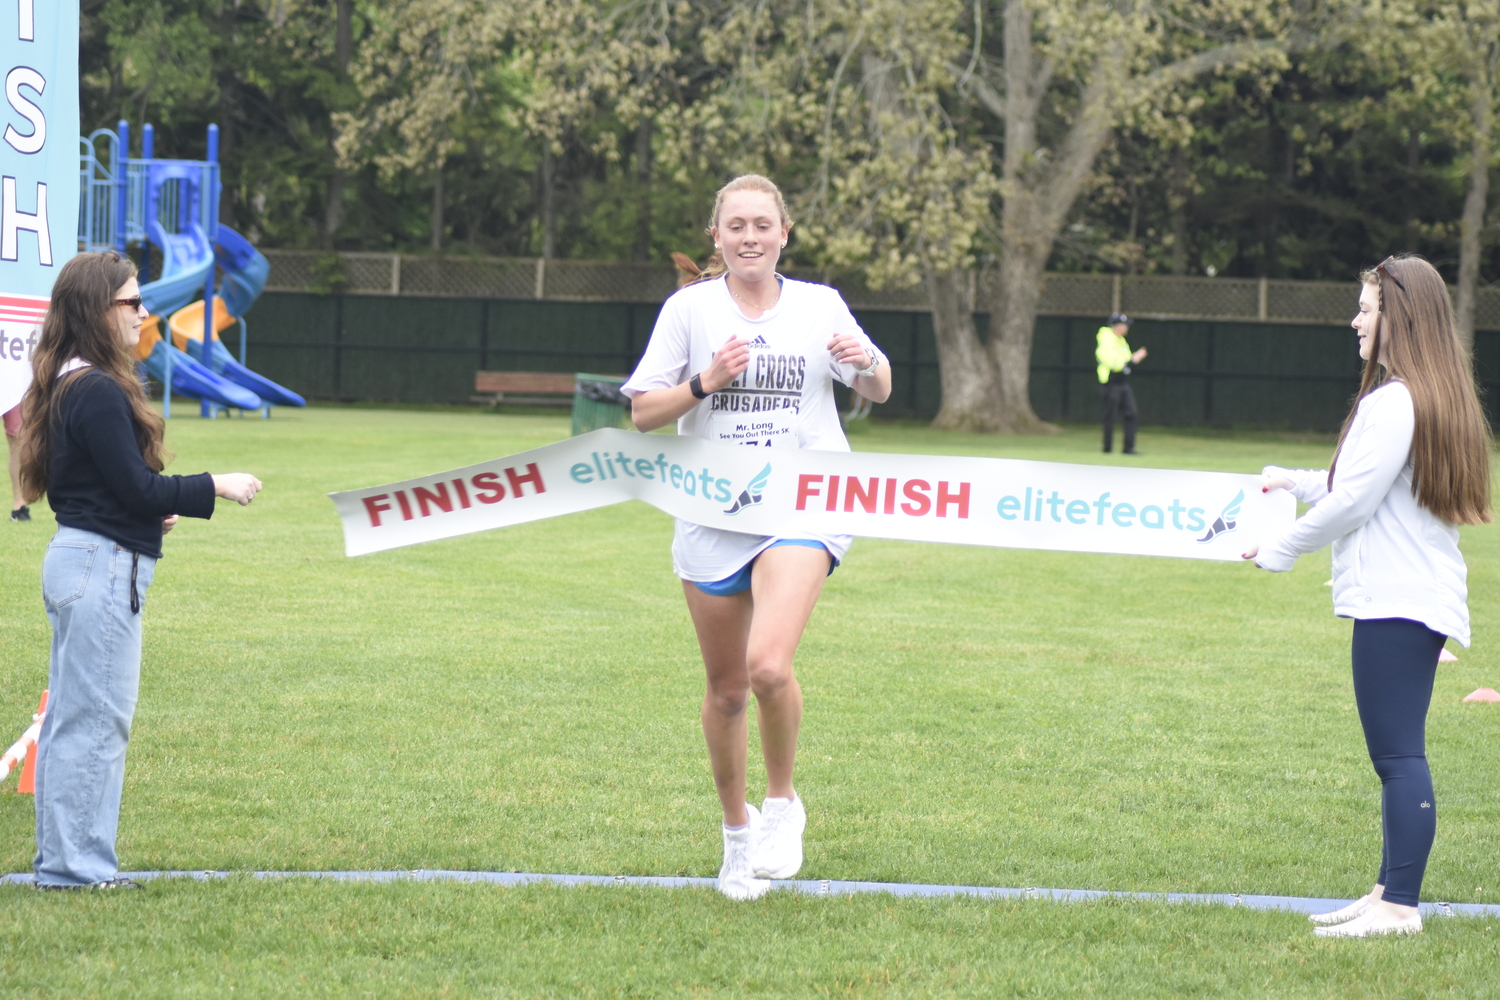 Jackie Amato, an East Quogue Elementary School graduate currently attending Holy Cross University, won the women's champion of Saturday's race.   DREW BUDD